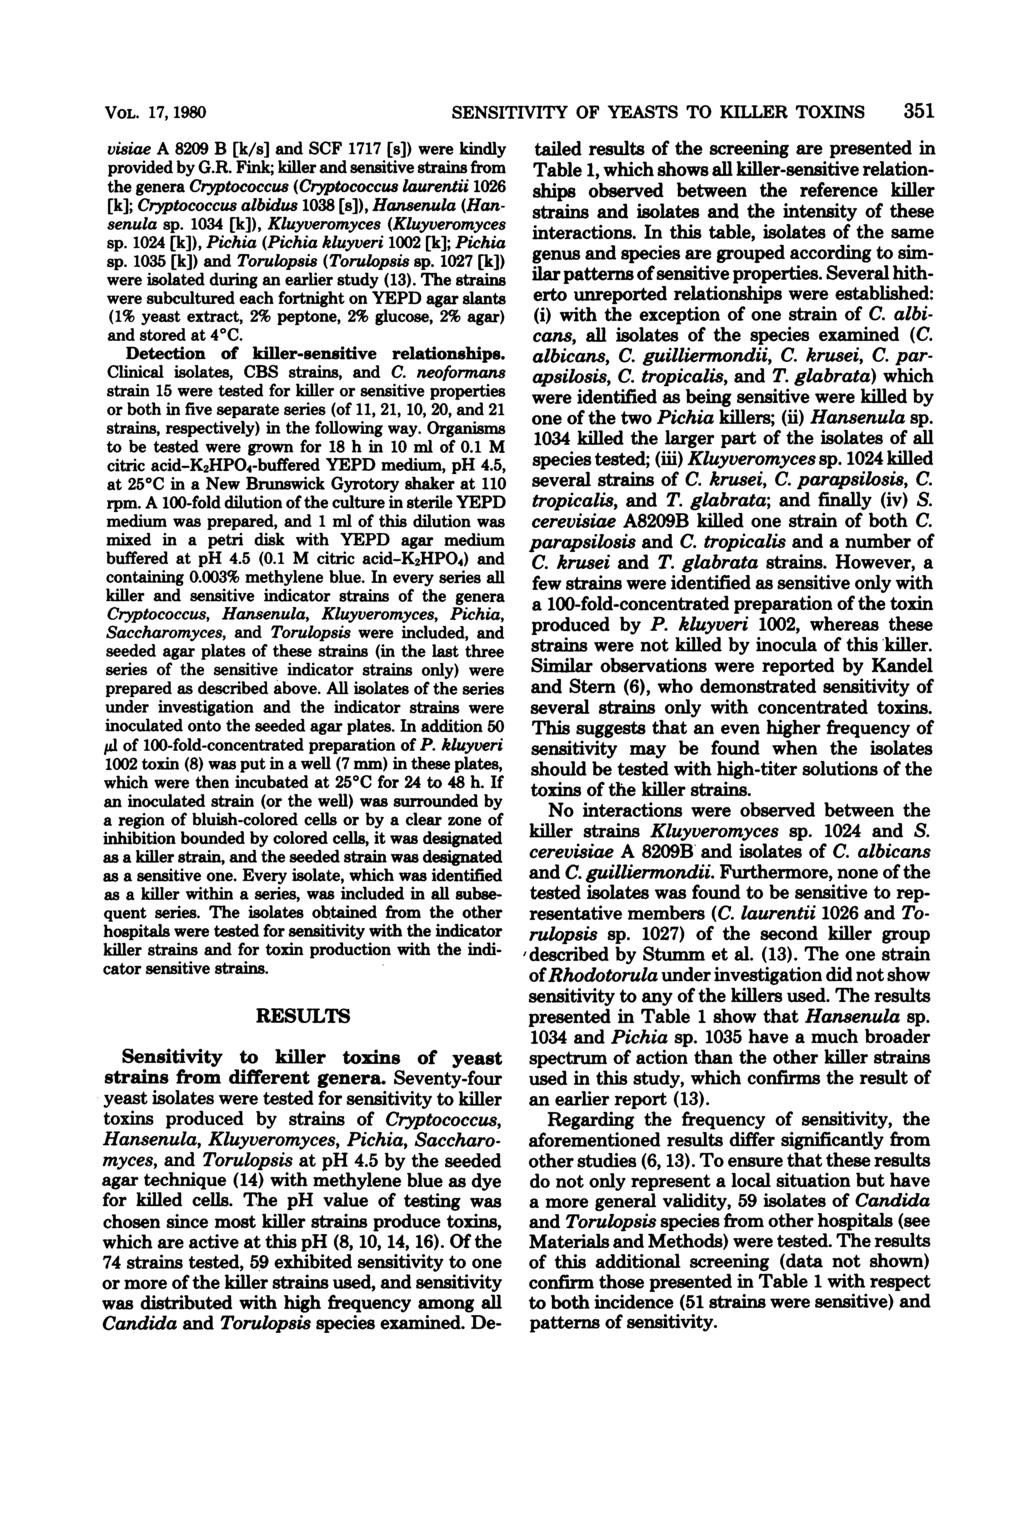 VOL. 17, 1980 visiae A 8209 B [k/s] and SCF 1717 [s]) were kindly provided by G.R.